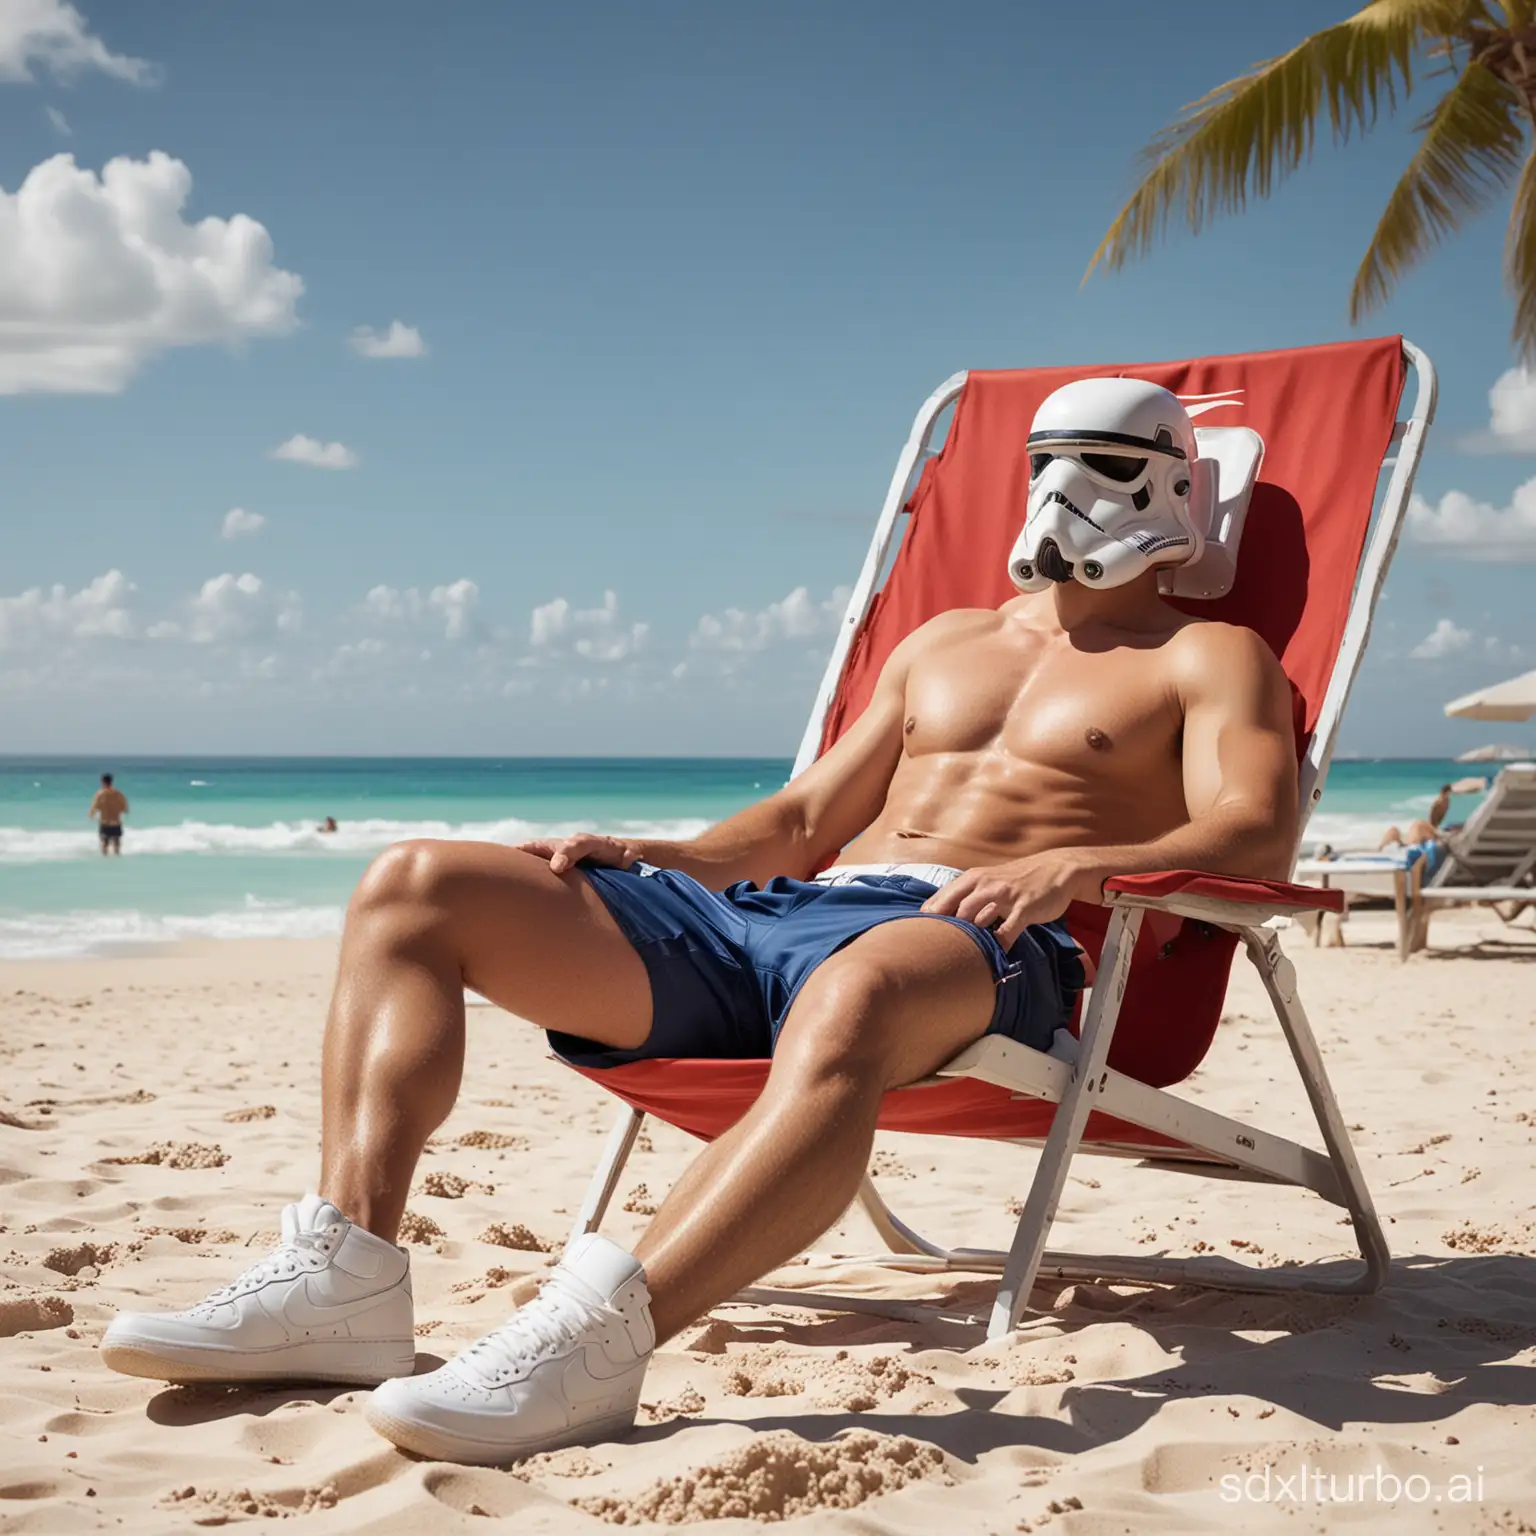 A man with a Stormtrooper helmet, swimming shorts, no shirt, with Nike Air Force 1 sneakers, on the beach in Cancun sunbathing on a red lounge chair. Photography, realistic photo with great detail in textures and brightness. Realism, science fiction. by Jacques-Louis David. Detail of skin texture, bokeh, contrasting and intense colors, white, blue, yellow, red. Natural light. Open shot, wide angle lens. Hyper realistic, sci fi.
